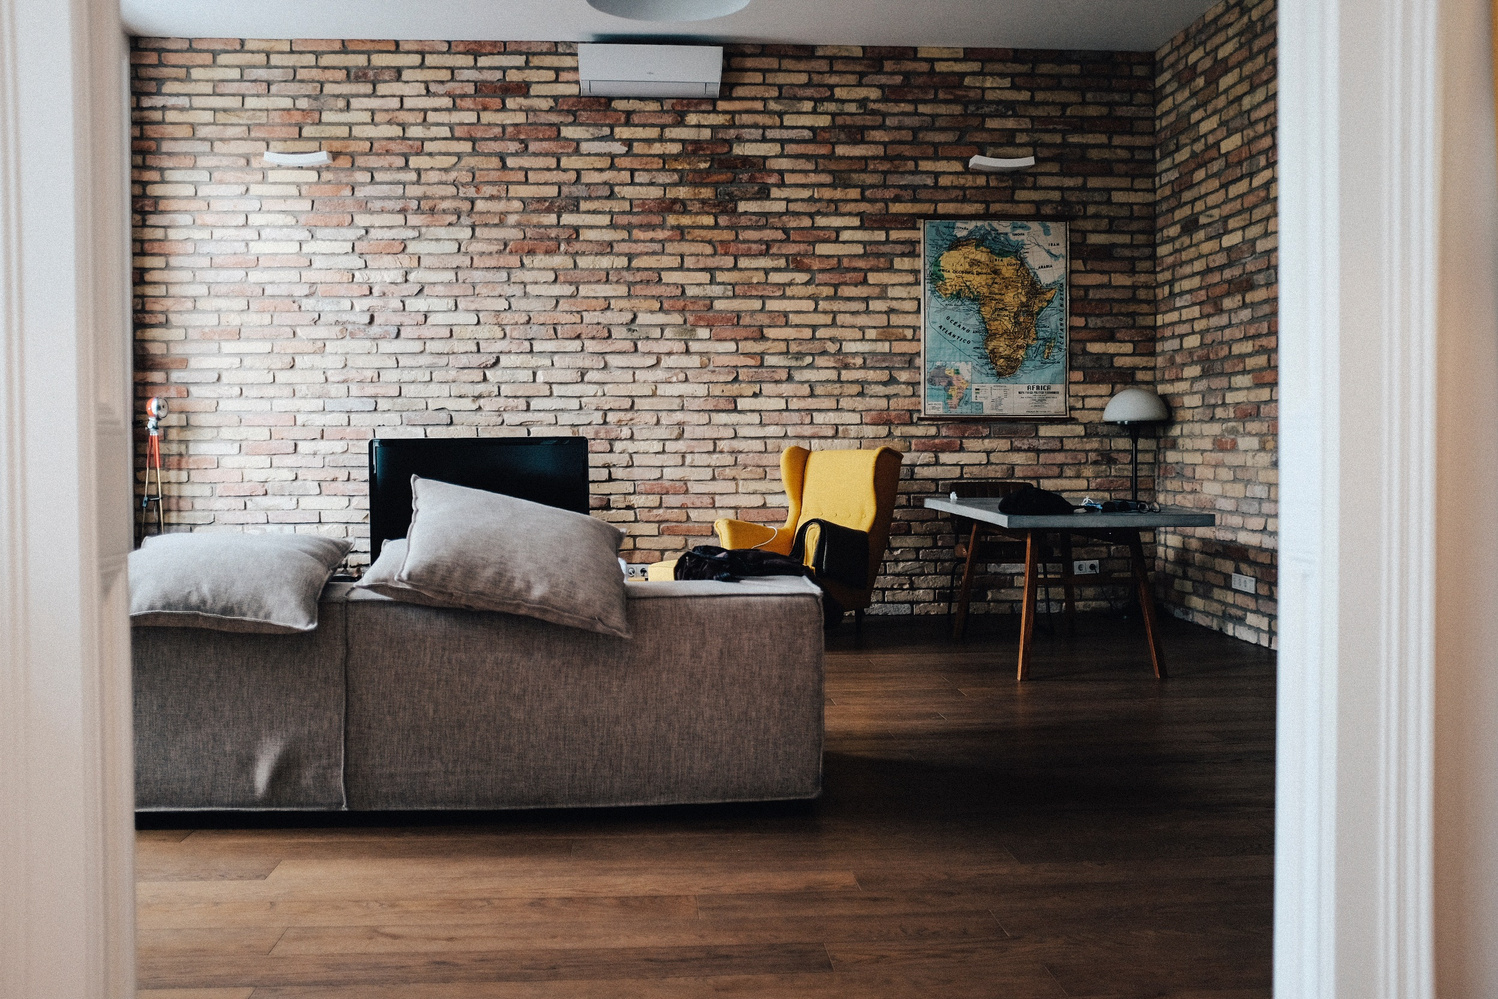 Modern Living Room Interior with Brick Wall